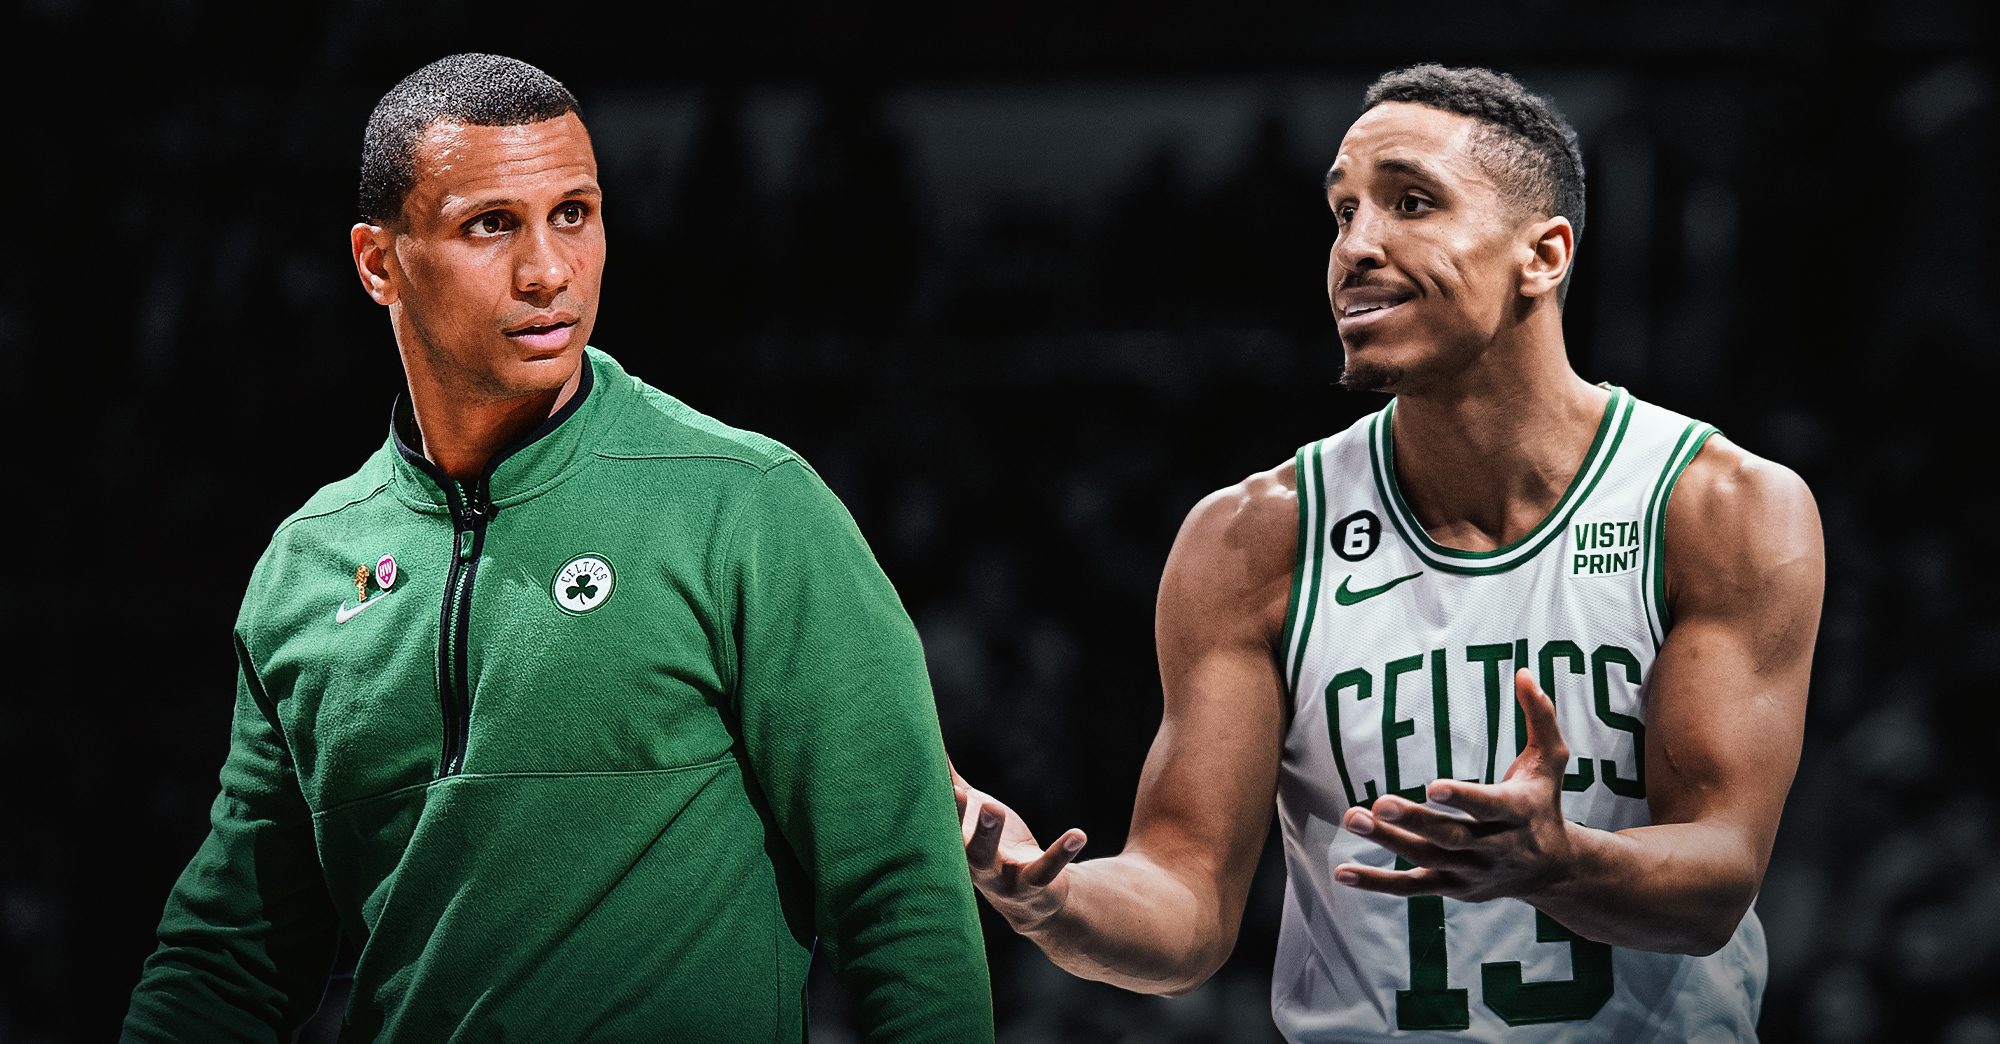 The Real Reason Malcolm Brogdon Is Angry With the Celtics